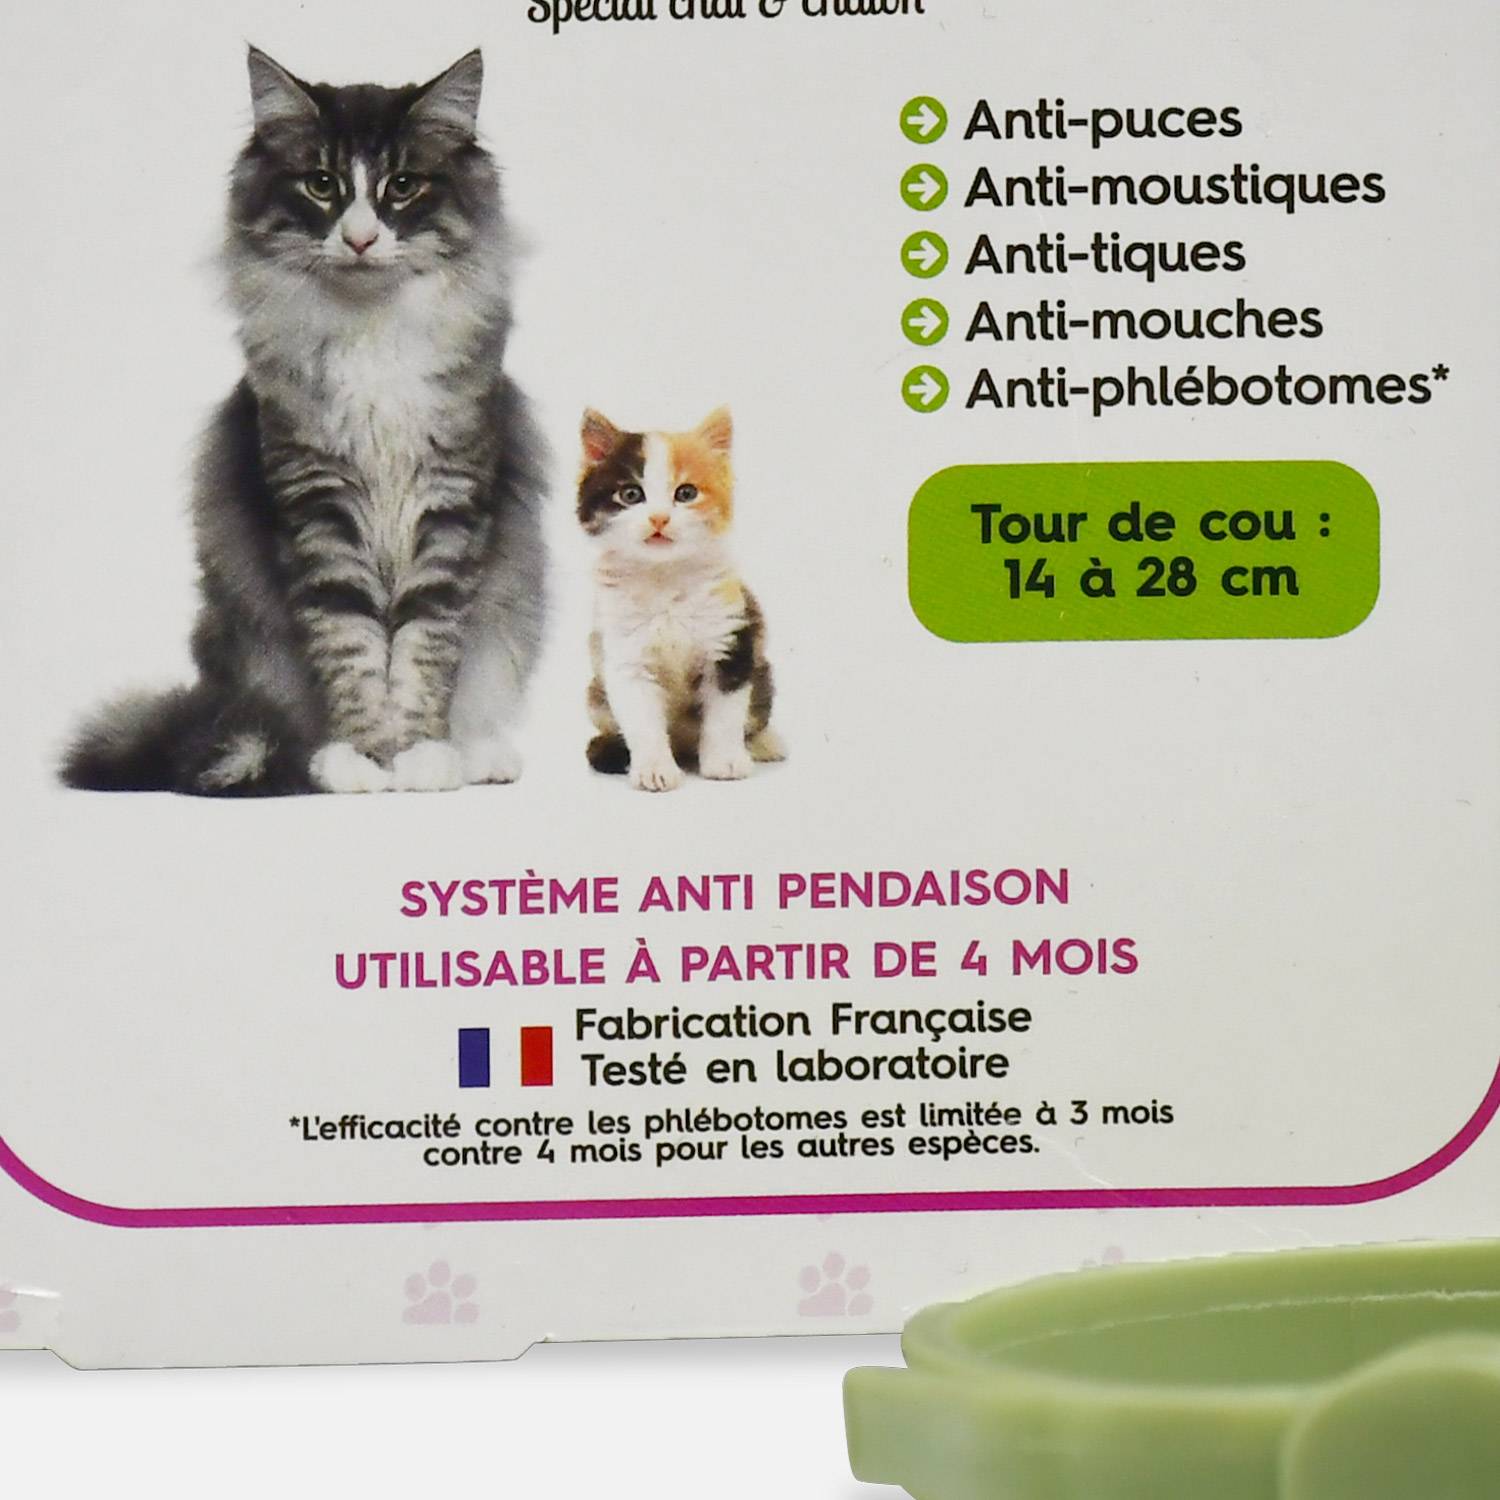 Collier répulsif antiparasitaire pour chat made in France Photo5